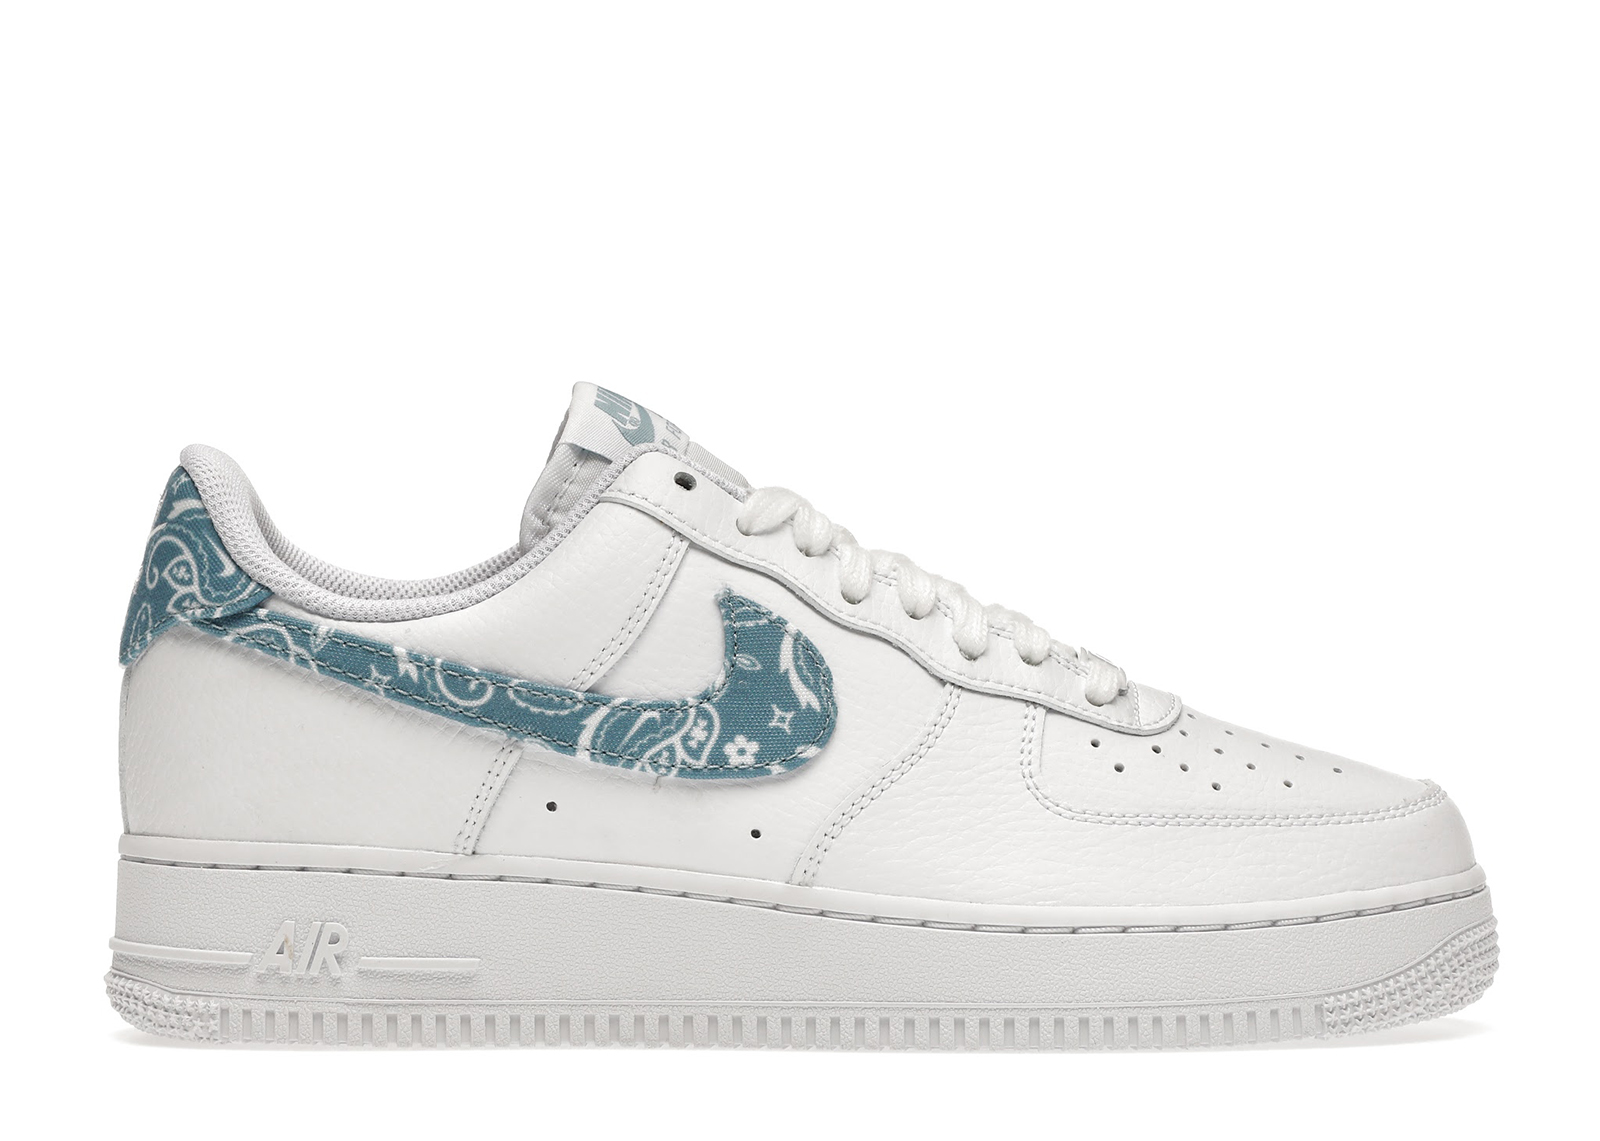 Nike Air Force 1 Low '07 Essential White Worn Blue Paisley (Women's)